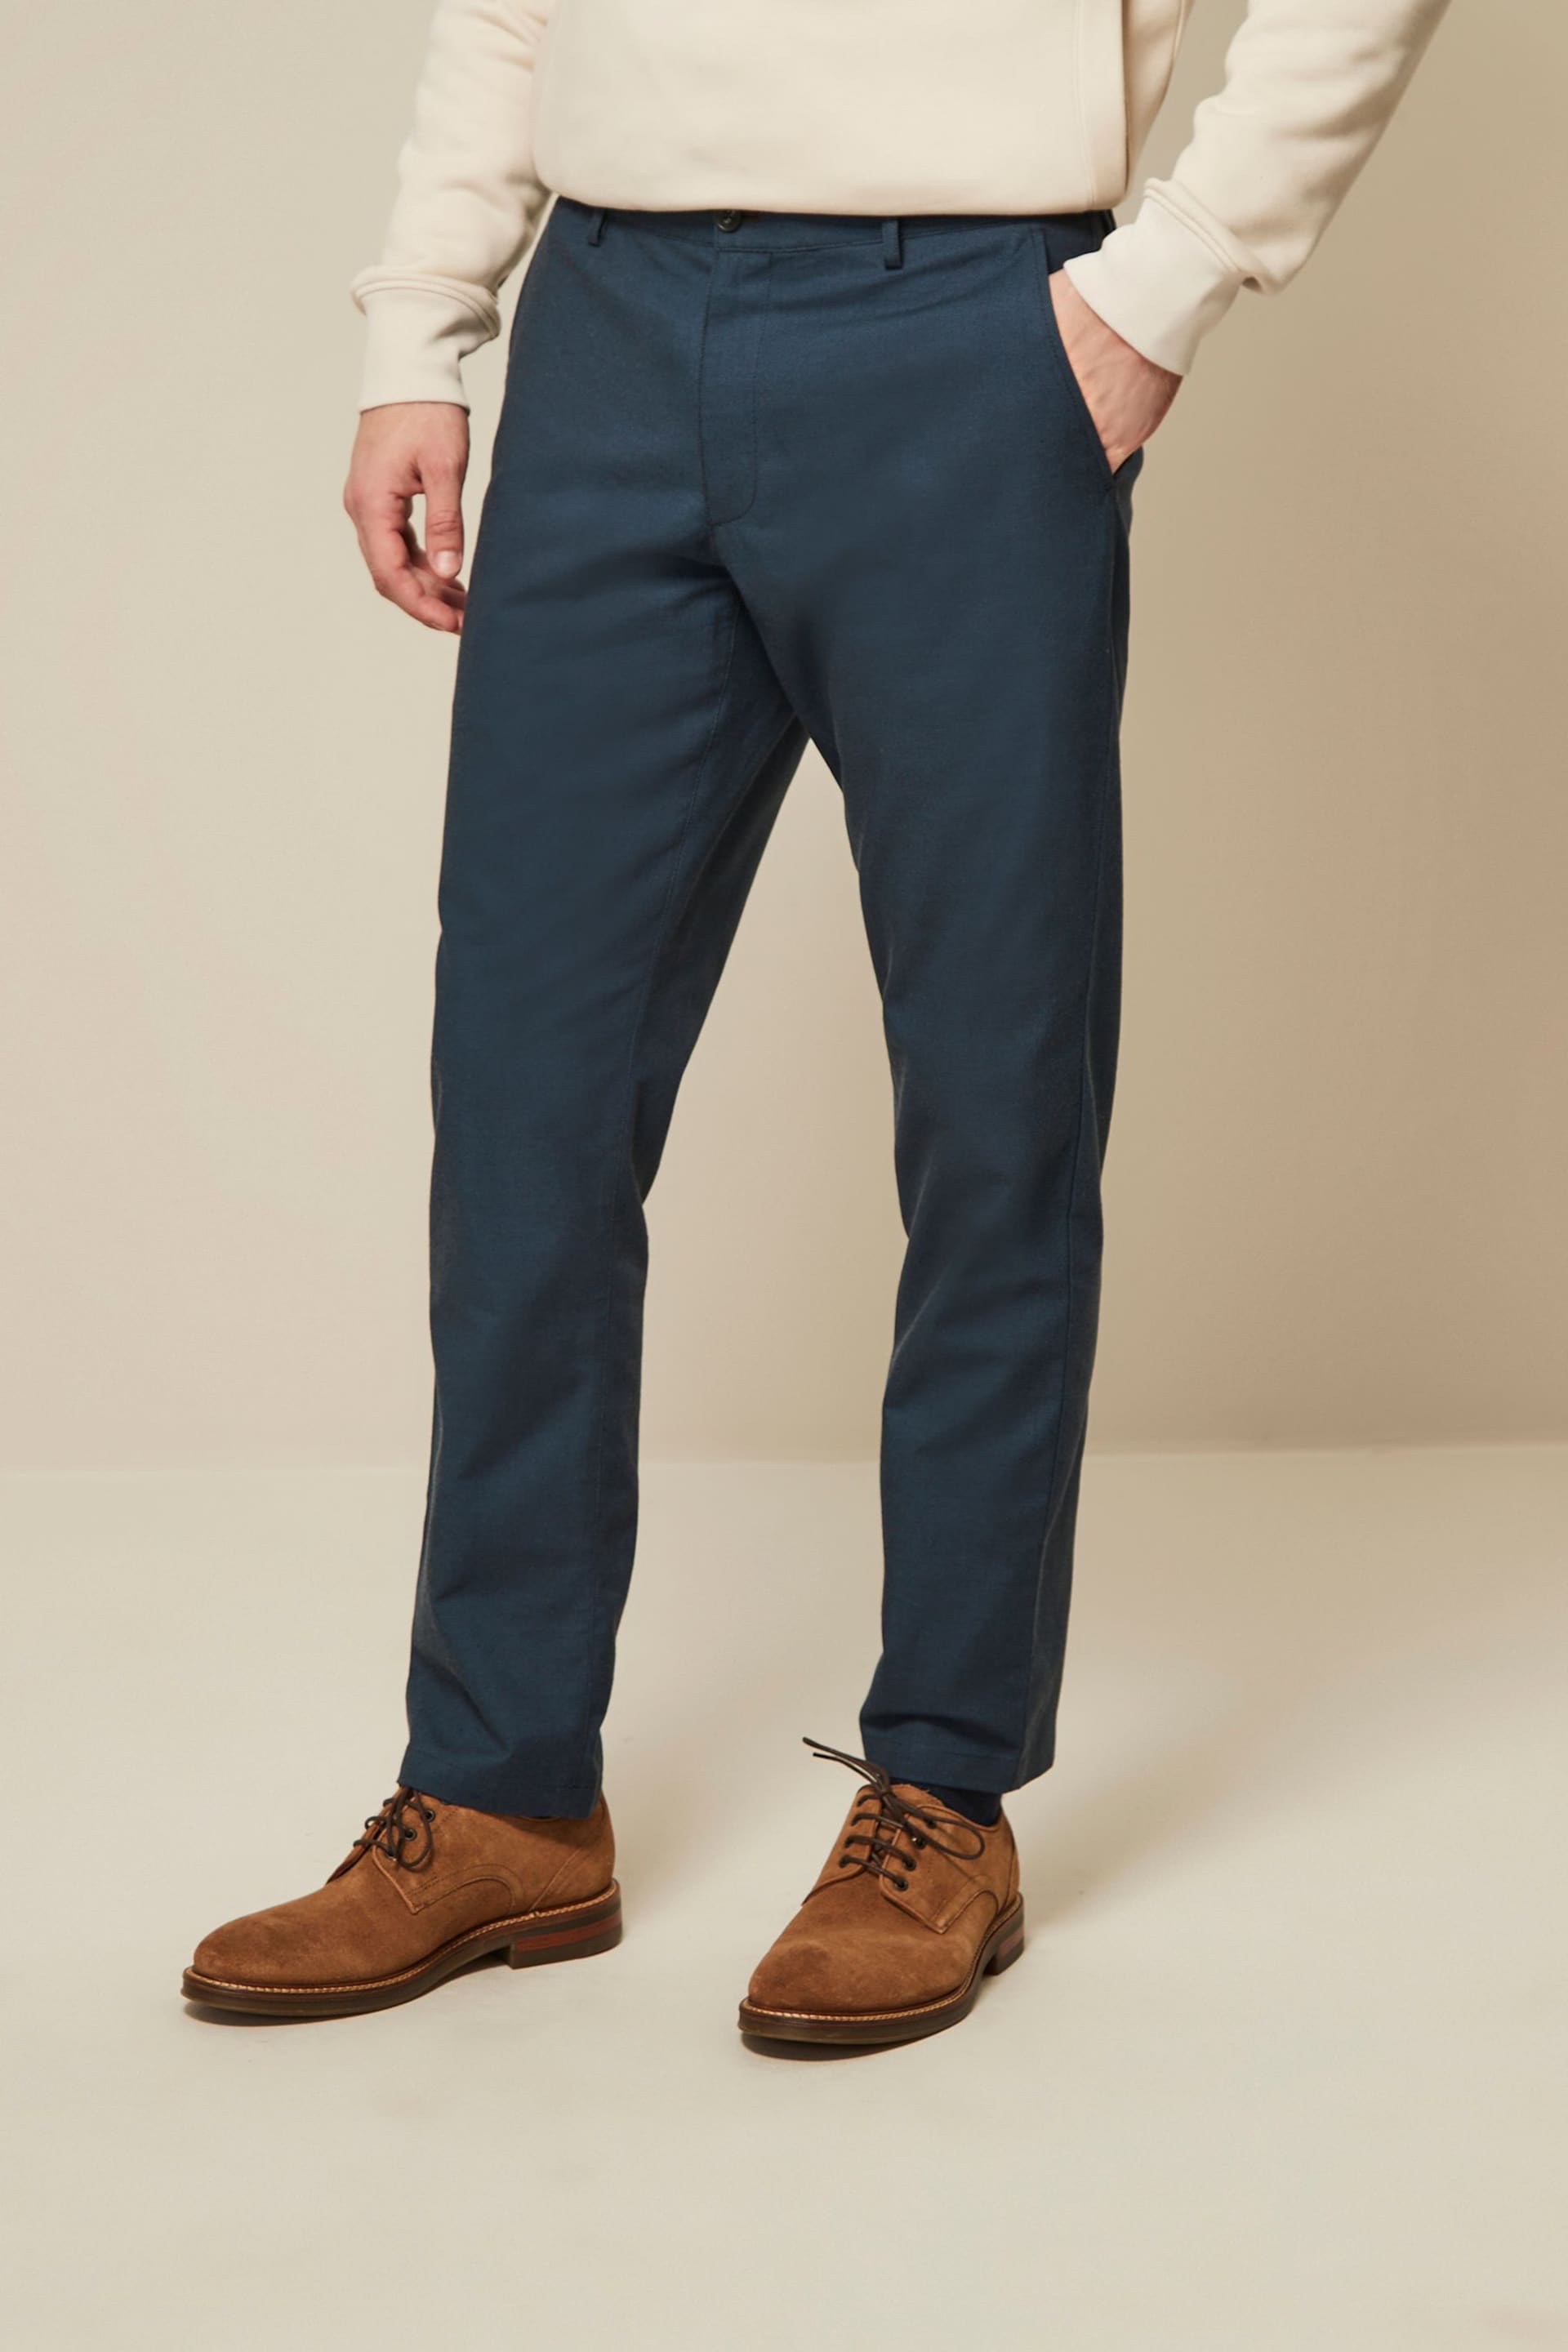 Blue 5 Pocket Smart Textured Chino Trousers - Image 1 of 8